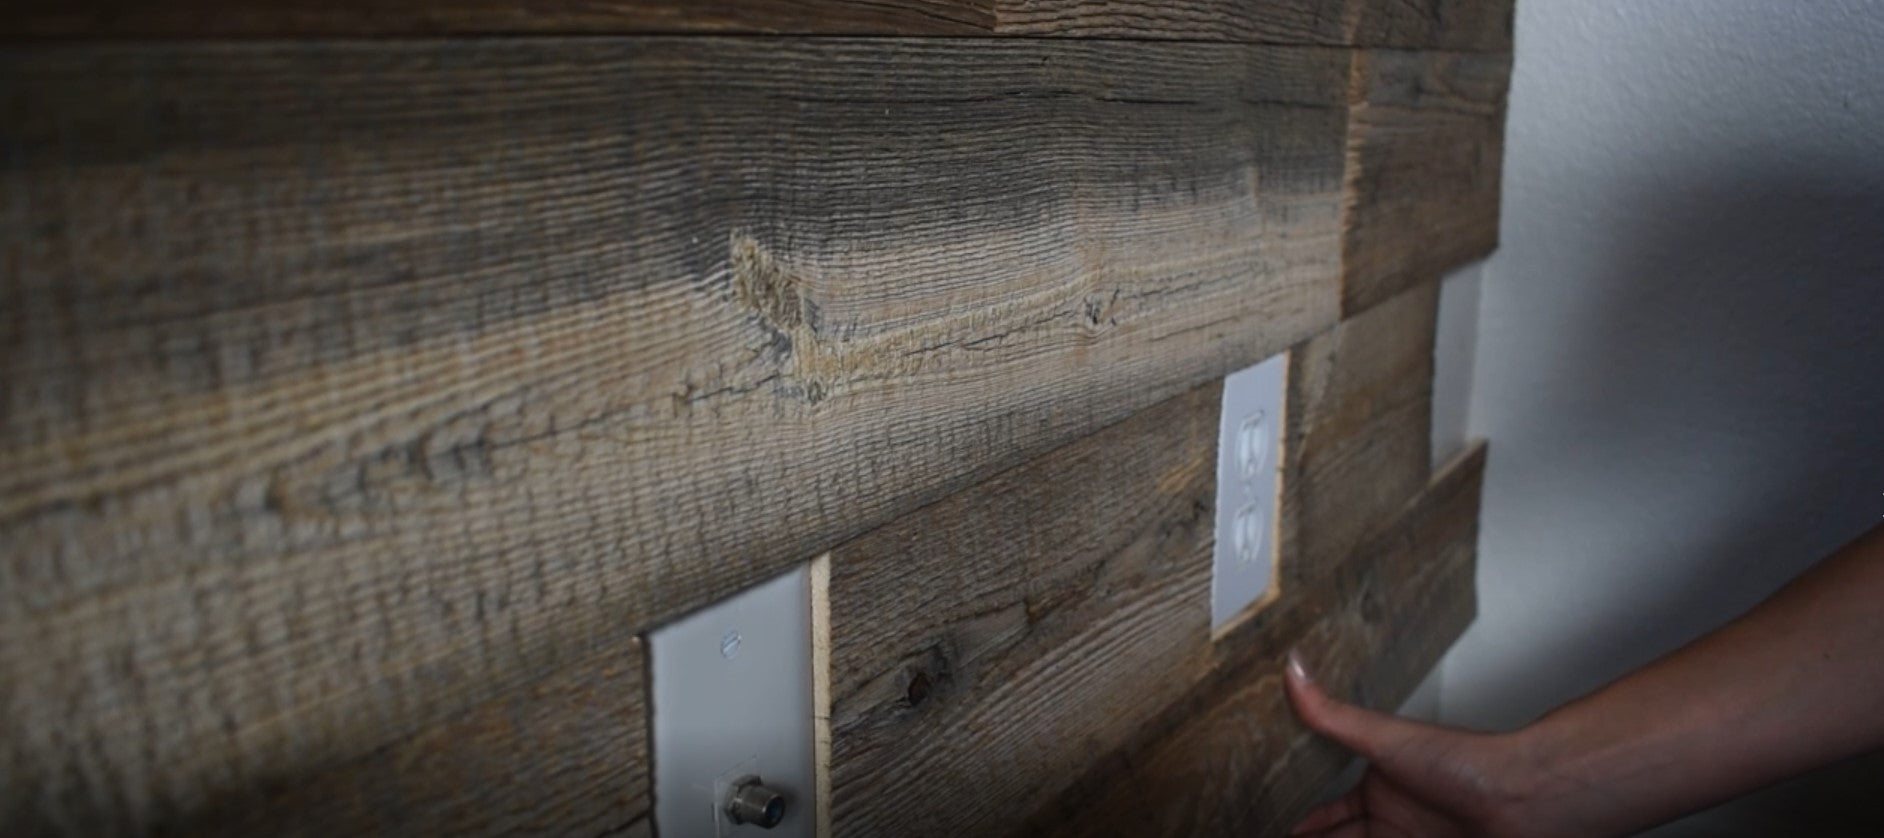 How to cut around an outlet when installing reclaimed wood